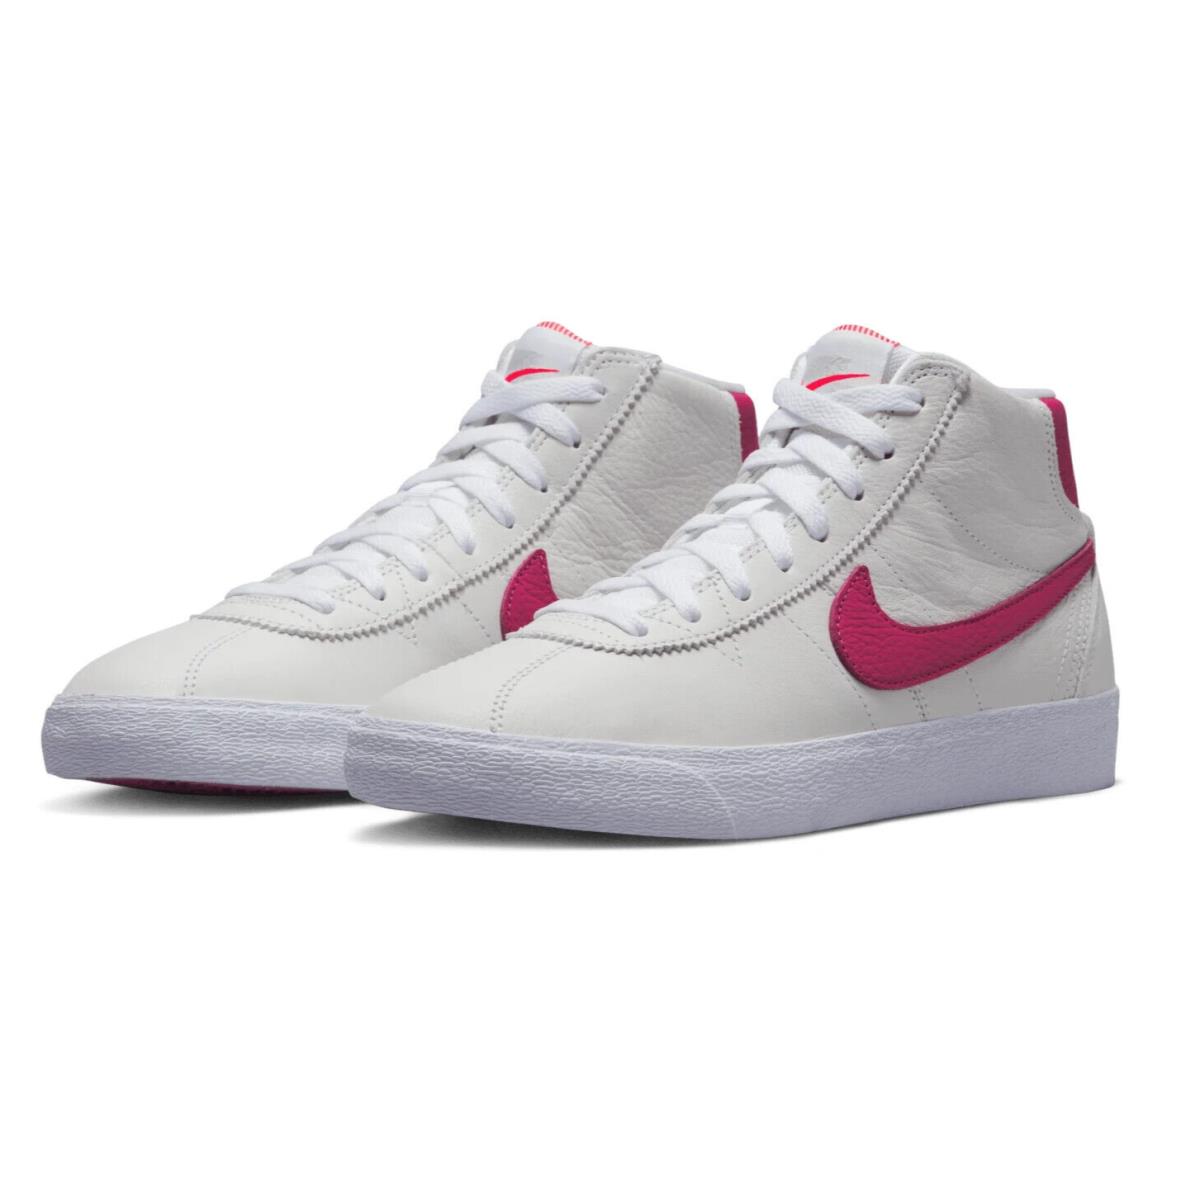 Nike SB Bruin Hi Iso Womens Size 11.5 Shoes DR0127 161 White Leather Beet